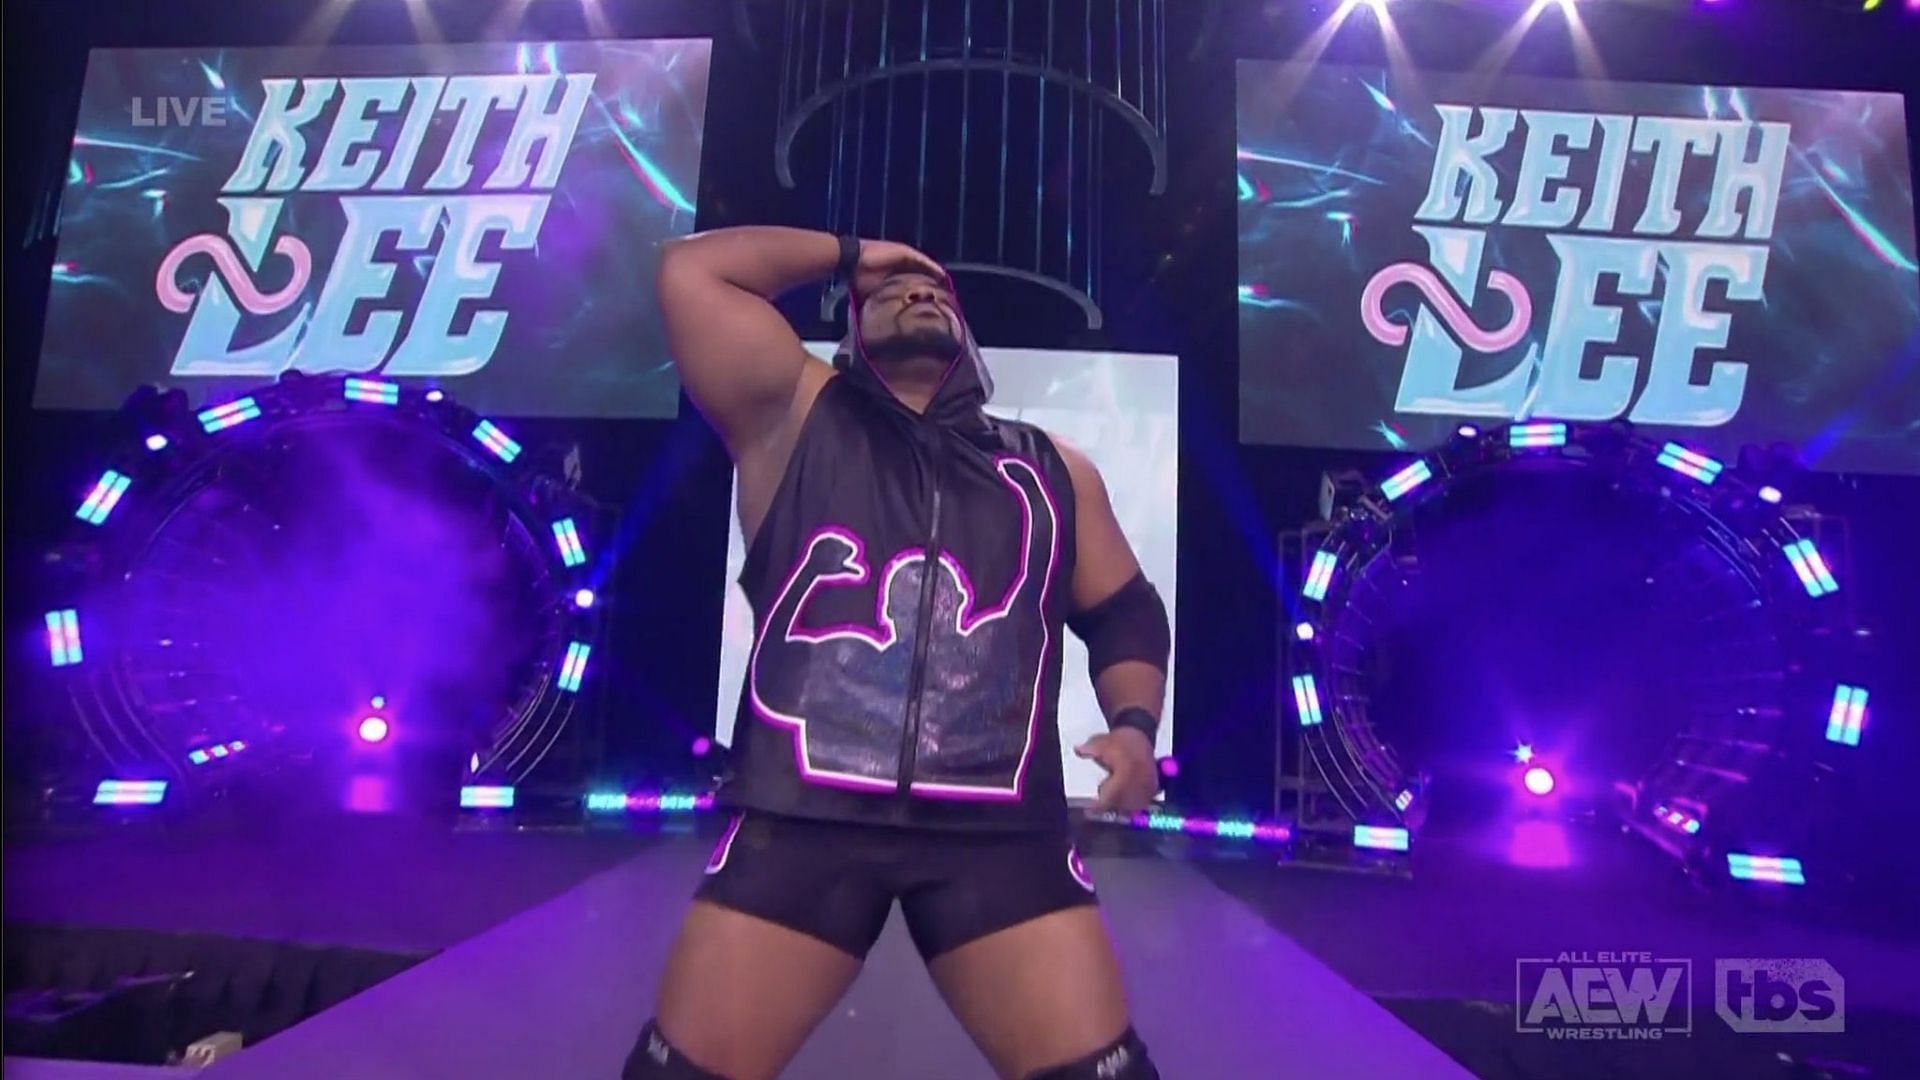 Keith Lee made his AEW debut on Dynamite.